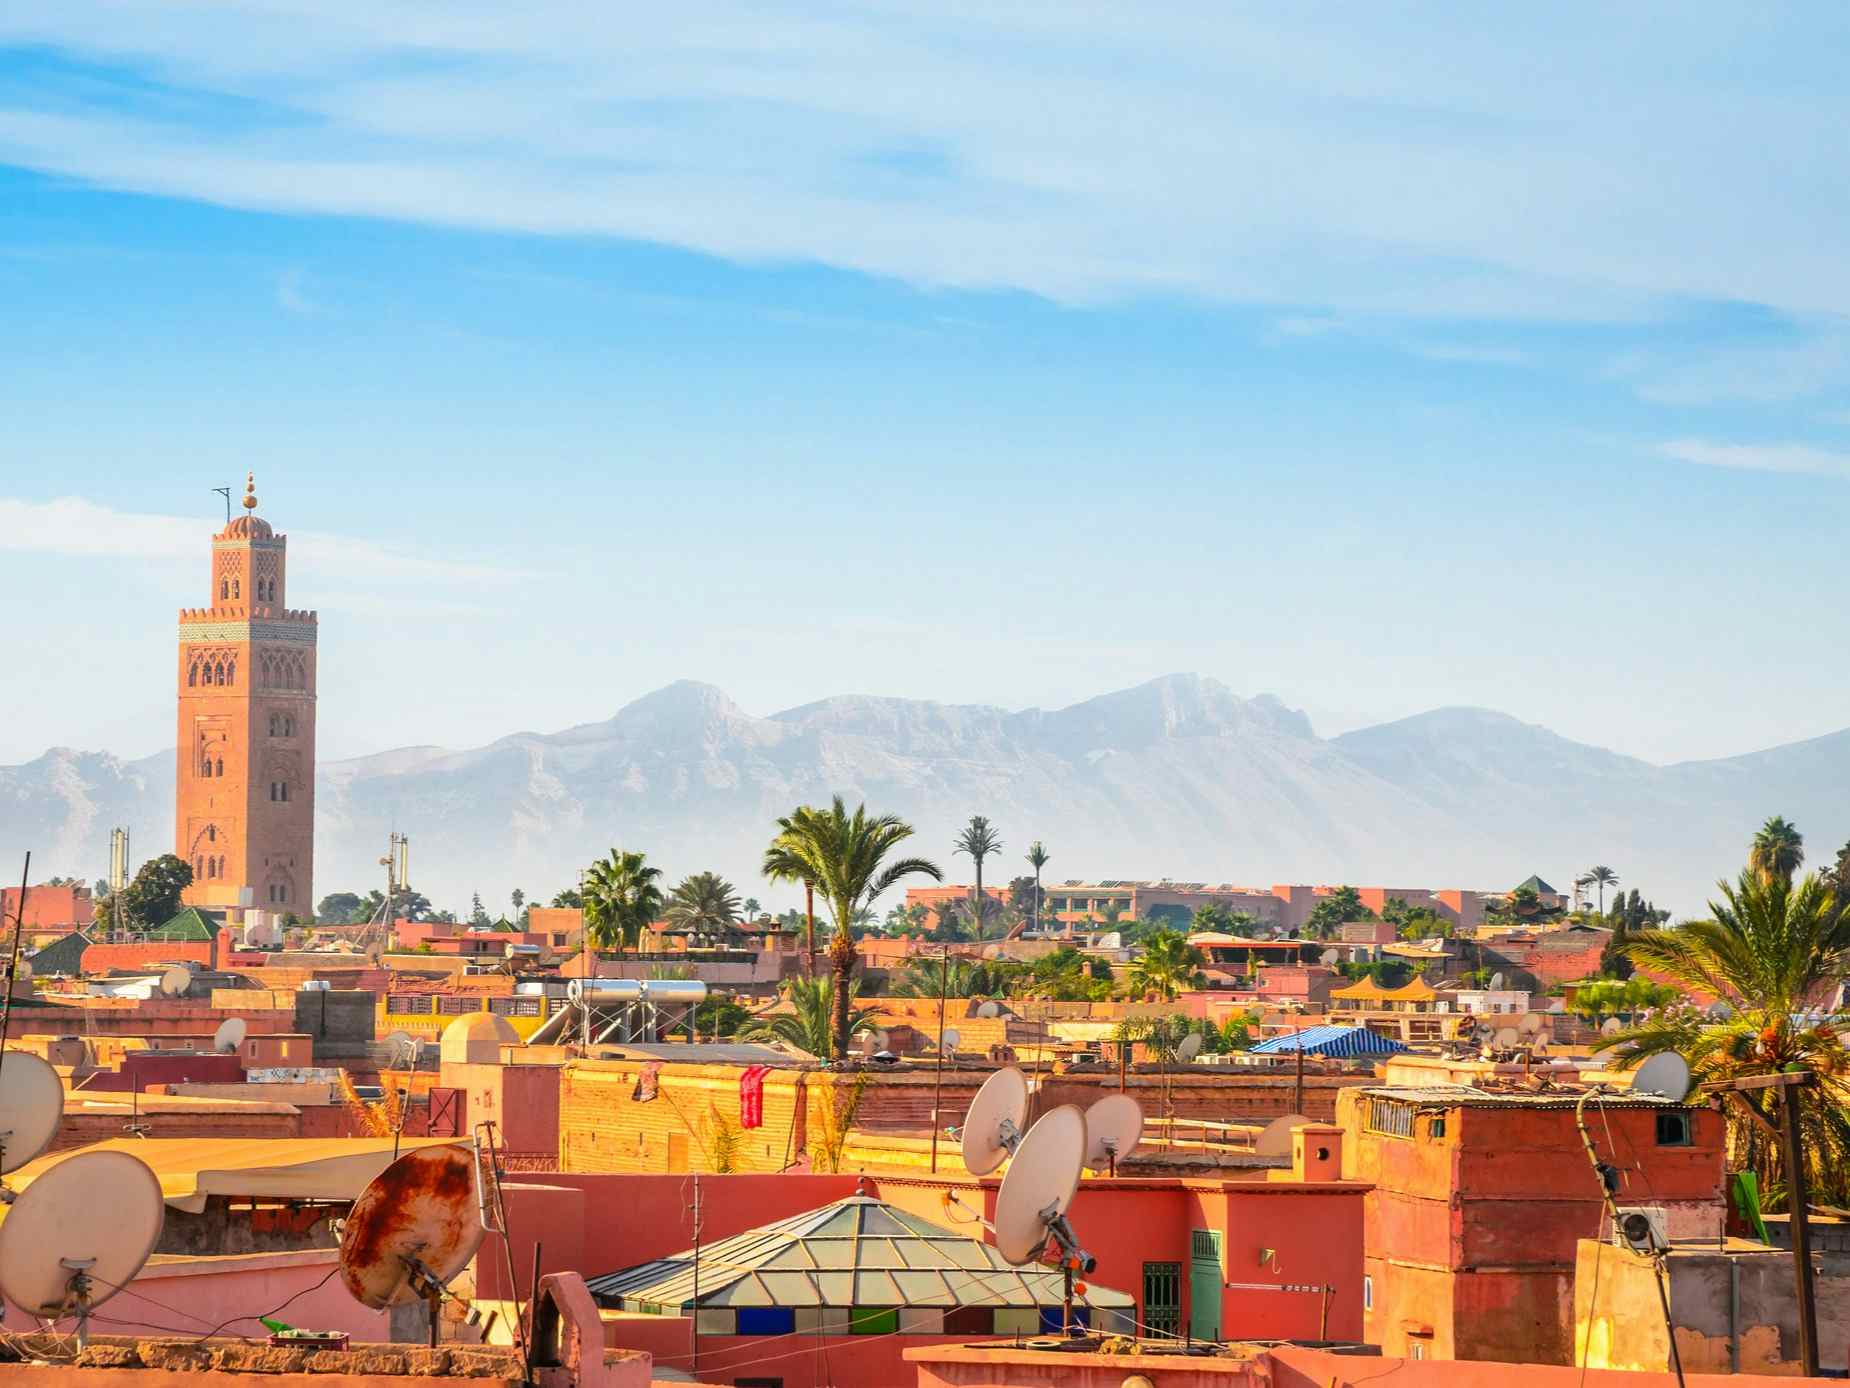 The rooftops of Marrakesh, Morocco. 